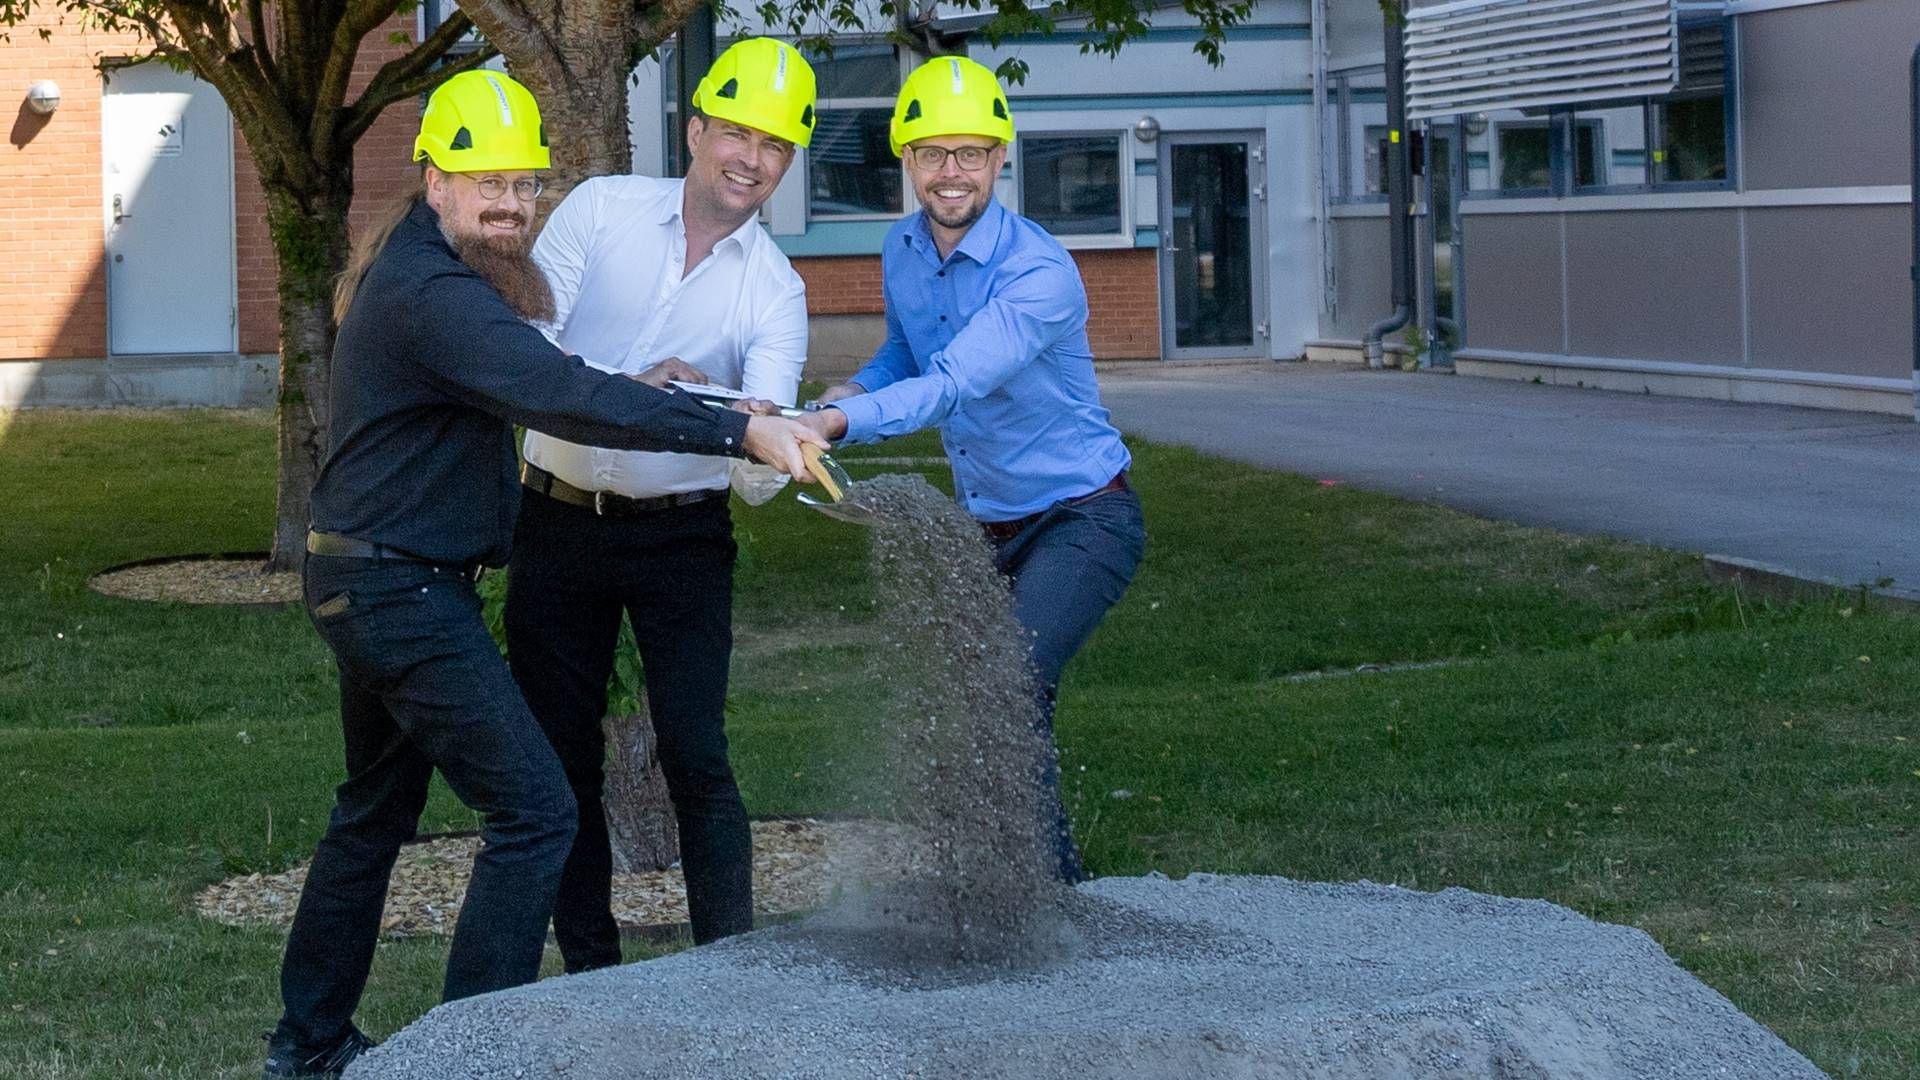 Ground has been broken on a new expansion of Pfizer's production facility in Strängnäs. Pictured from left are Mikael Brunell, Johan Carlsson and Jakob Holmlund. | Photo: Pfizer Sverige /PR